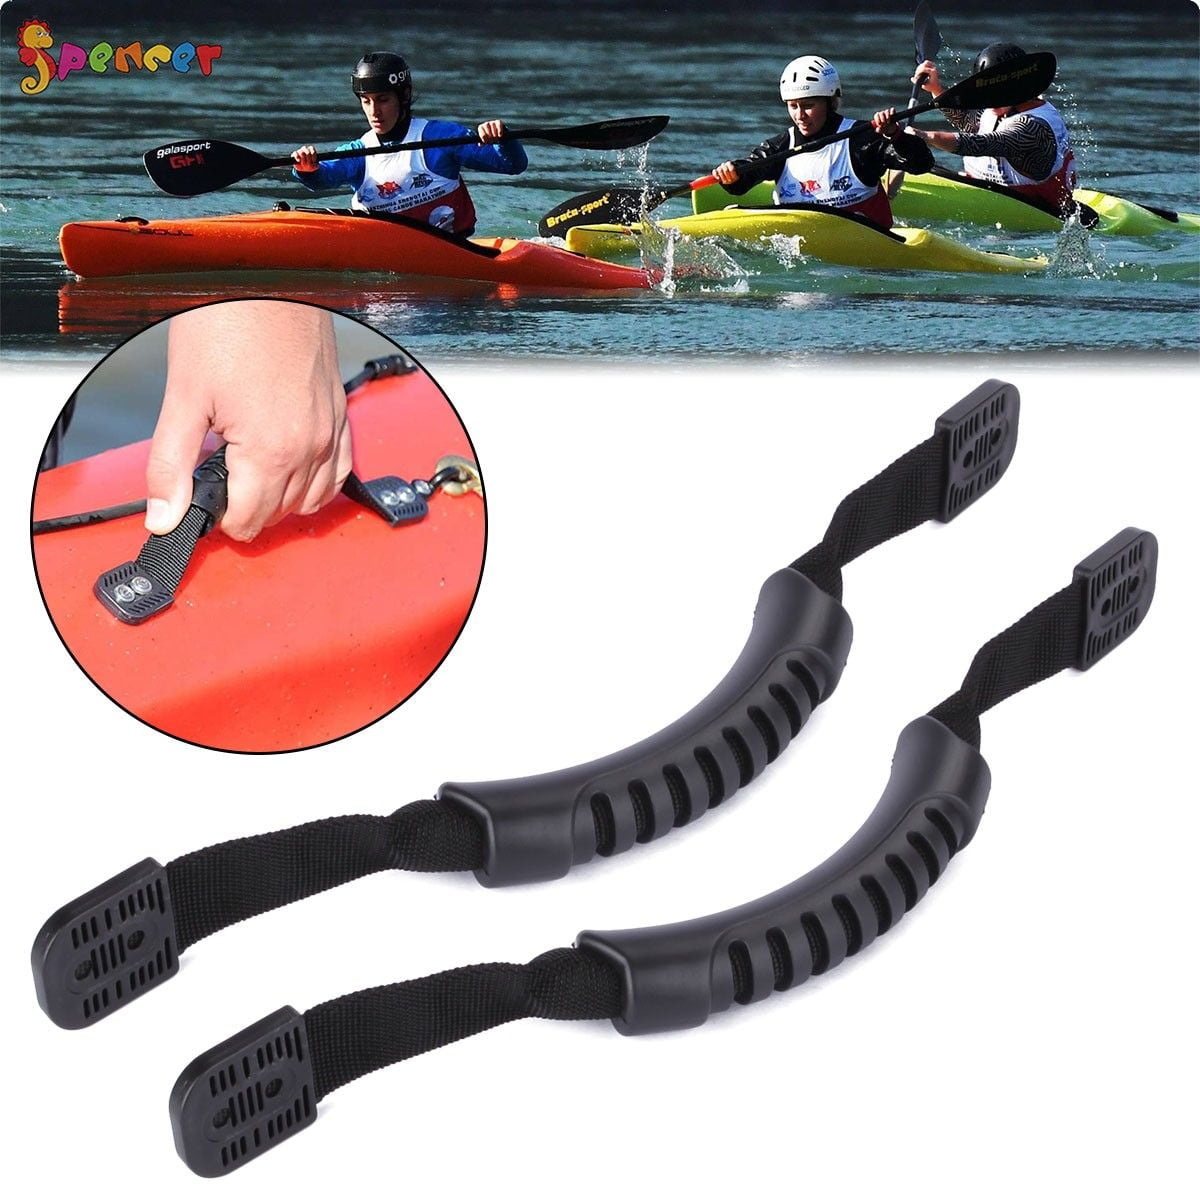 1Pair Kayak Canoe Boat Side Mount Carry Handle With Bungee Cord Accessories DIY 